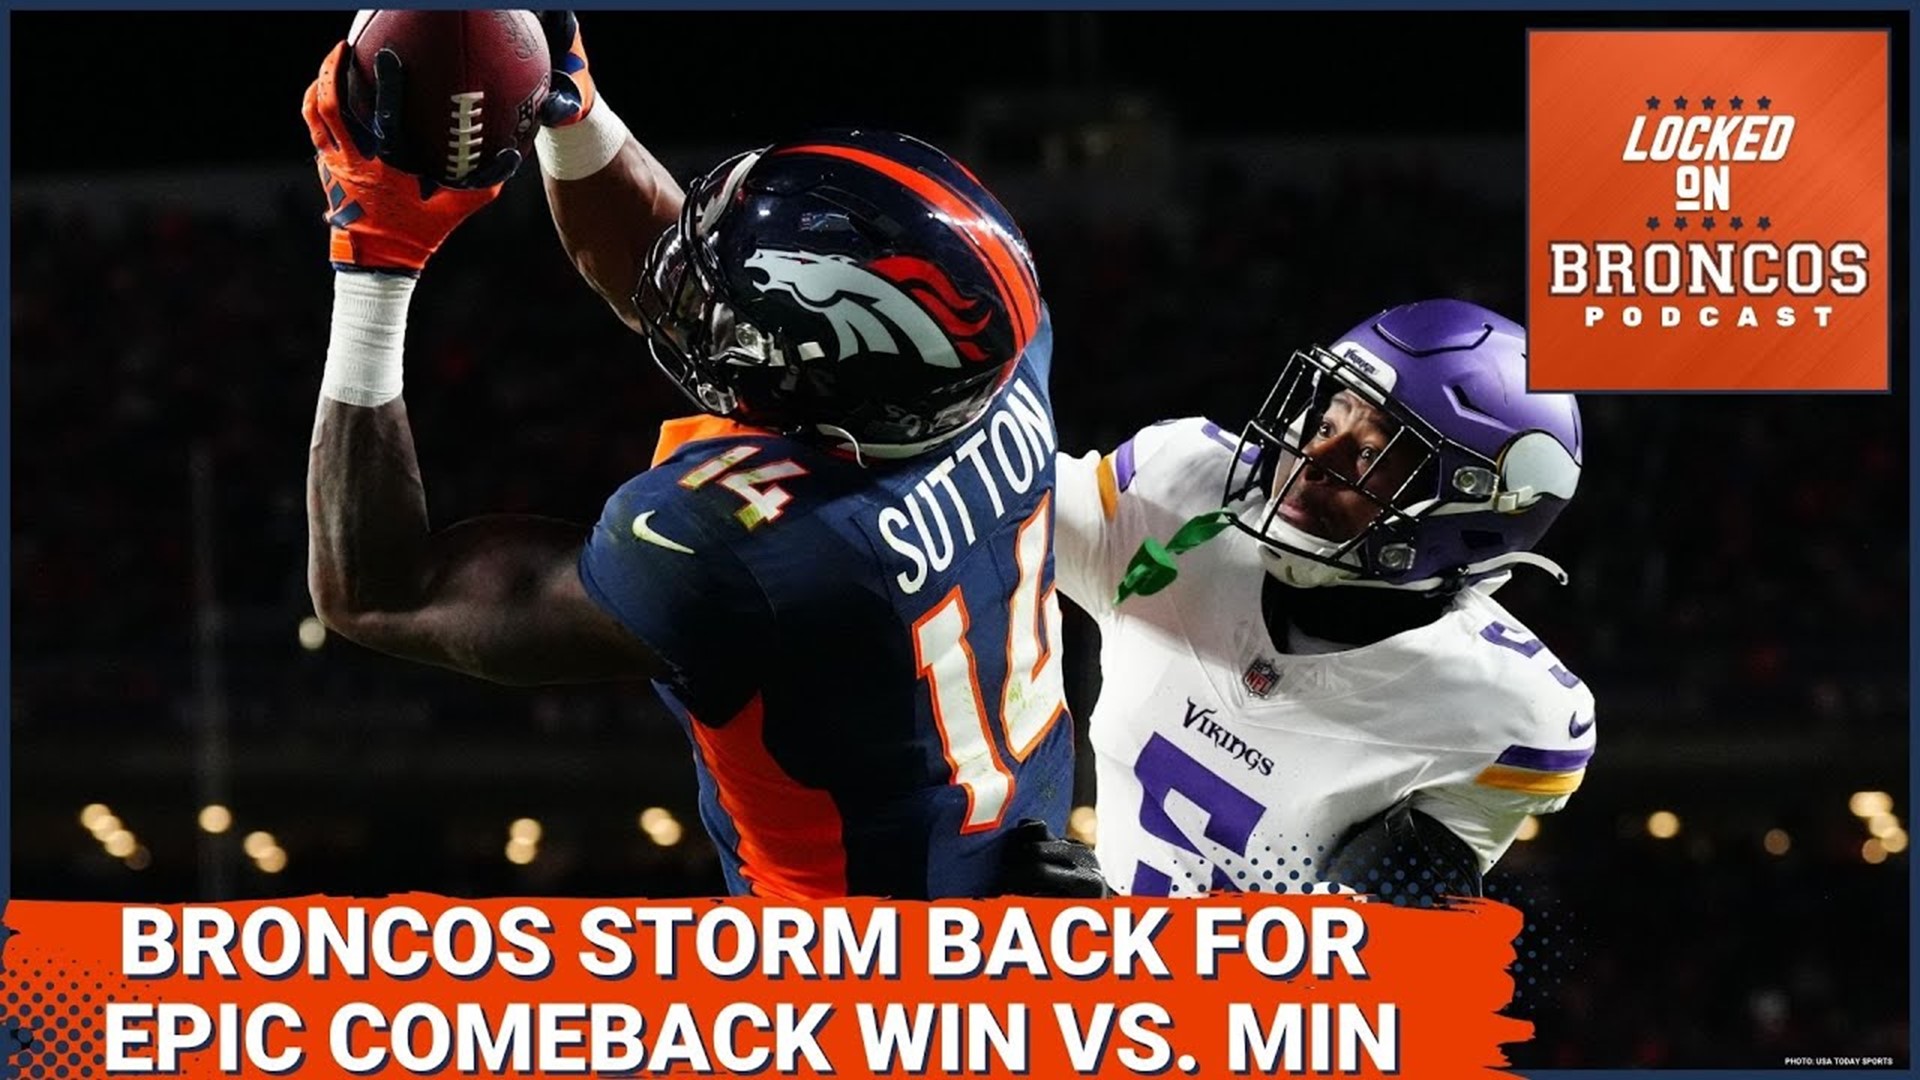 The Denver Broncos improved to 5-5 after Russell Wilson helped orchestrate an epic fourth quarter comeback.